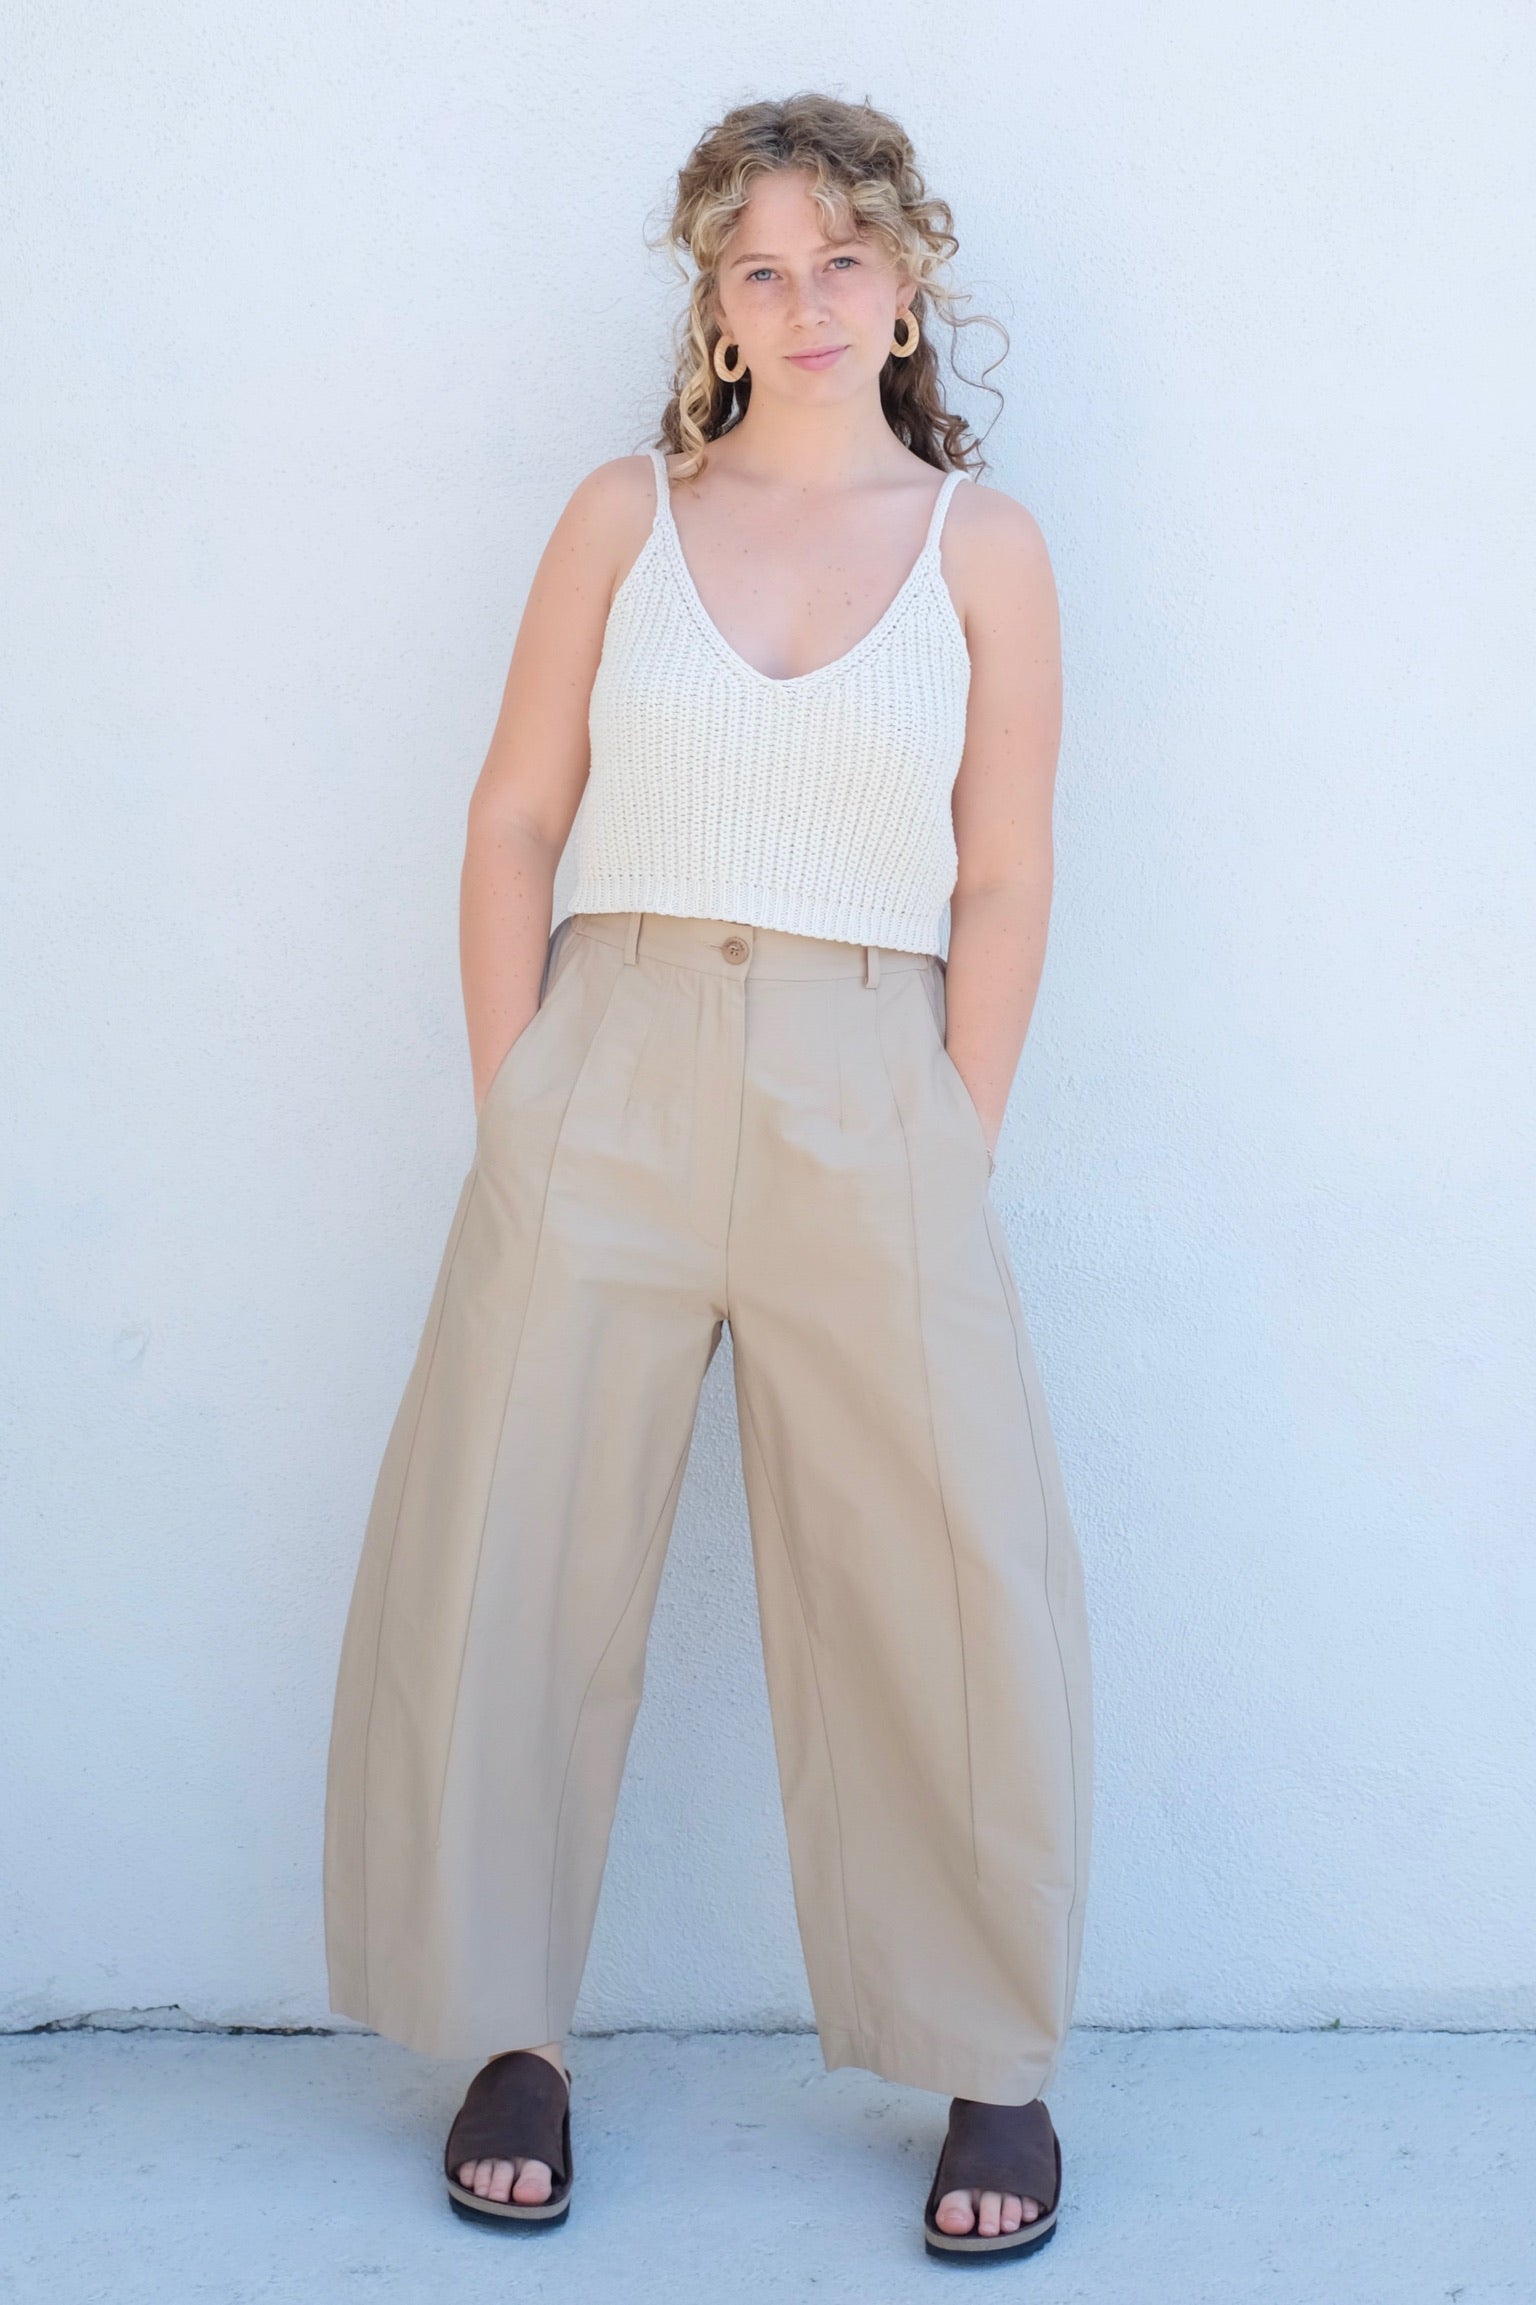 SS23 Seam Curved Pants / Toasted – ad hoc penticton